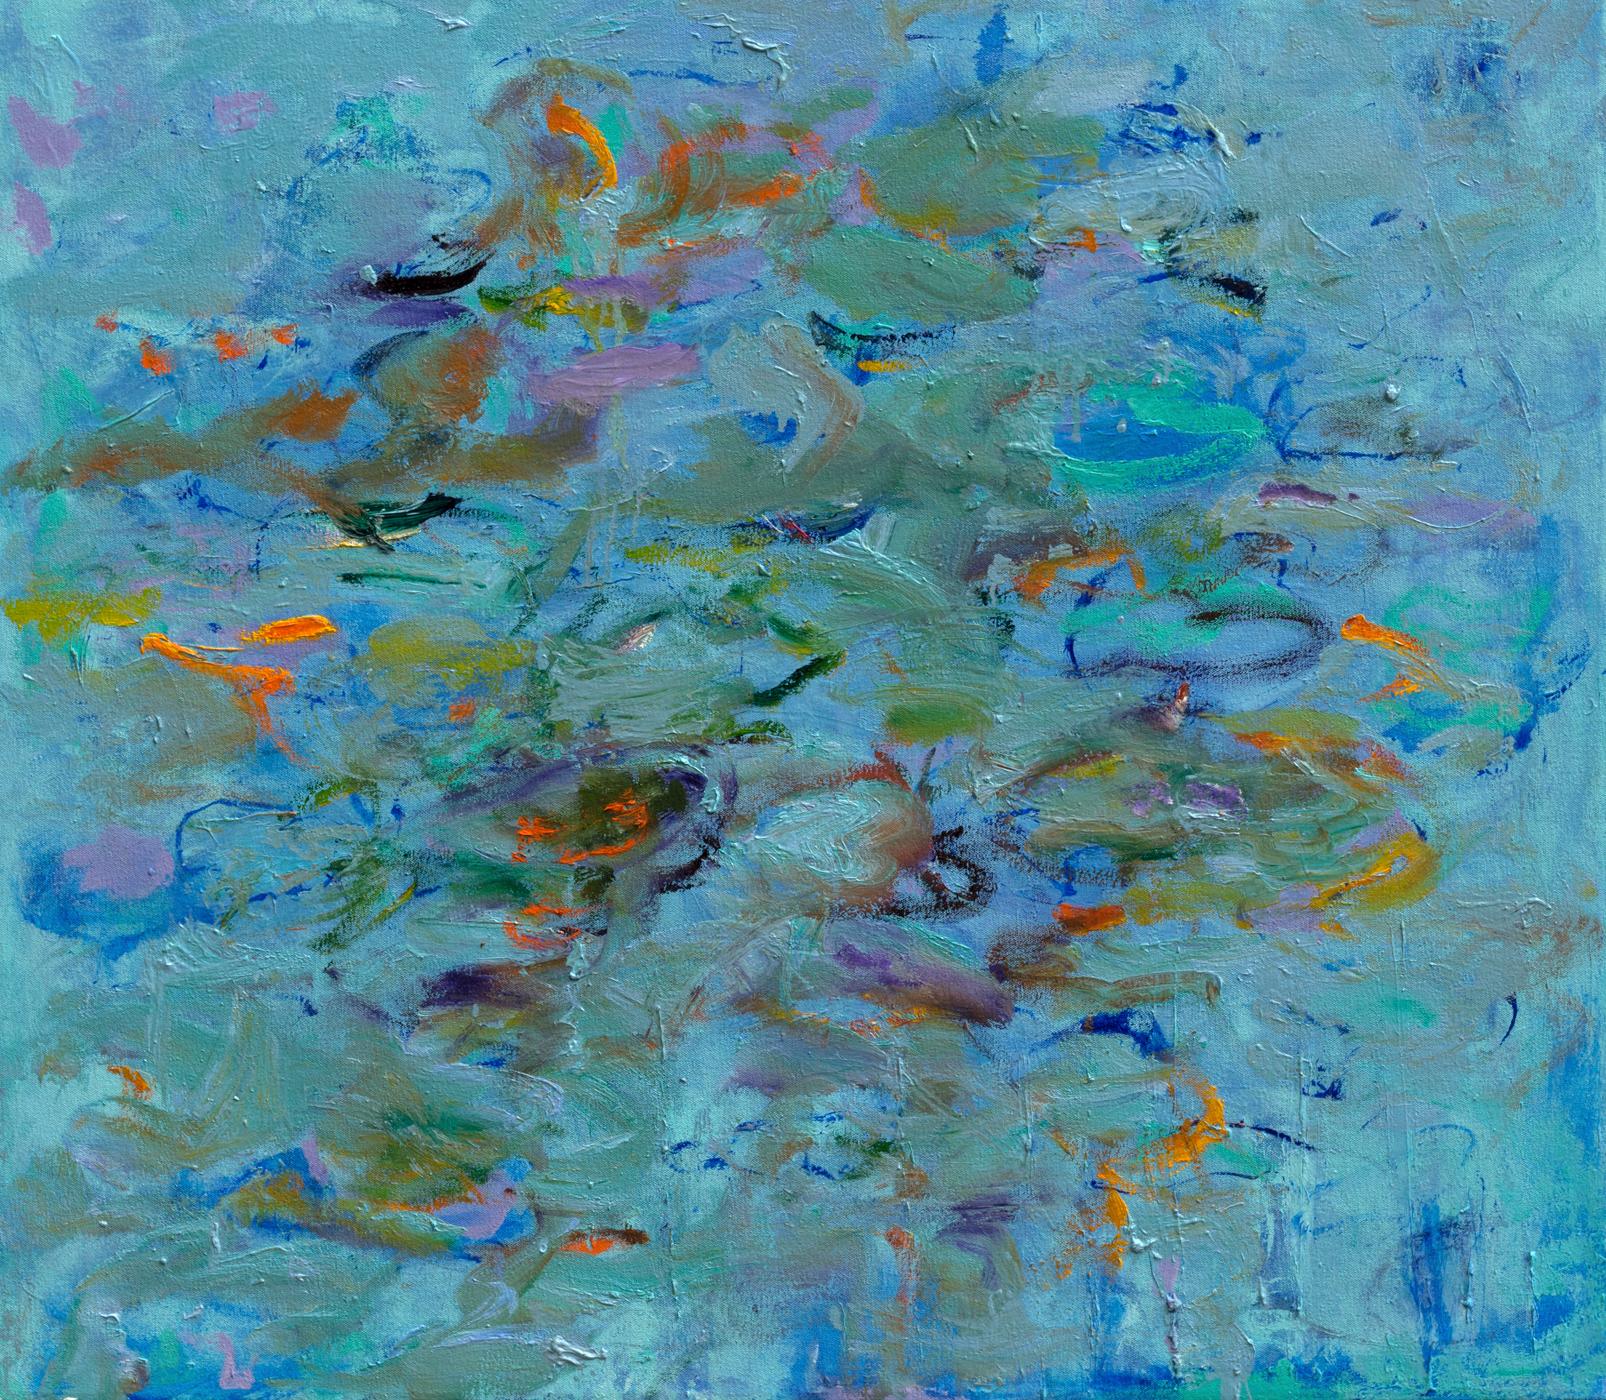 Katherine Borkowski-Byrne Abstract Painting - "Imagine", abstract, blue, green, red, oil painting